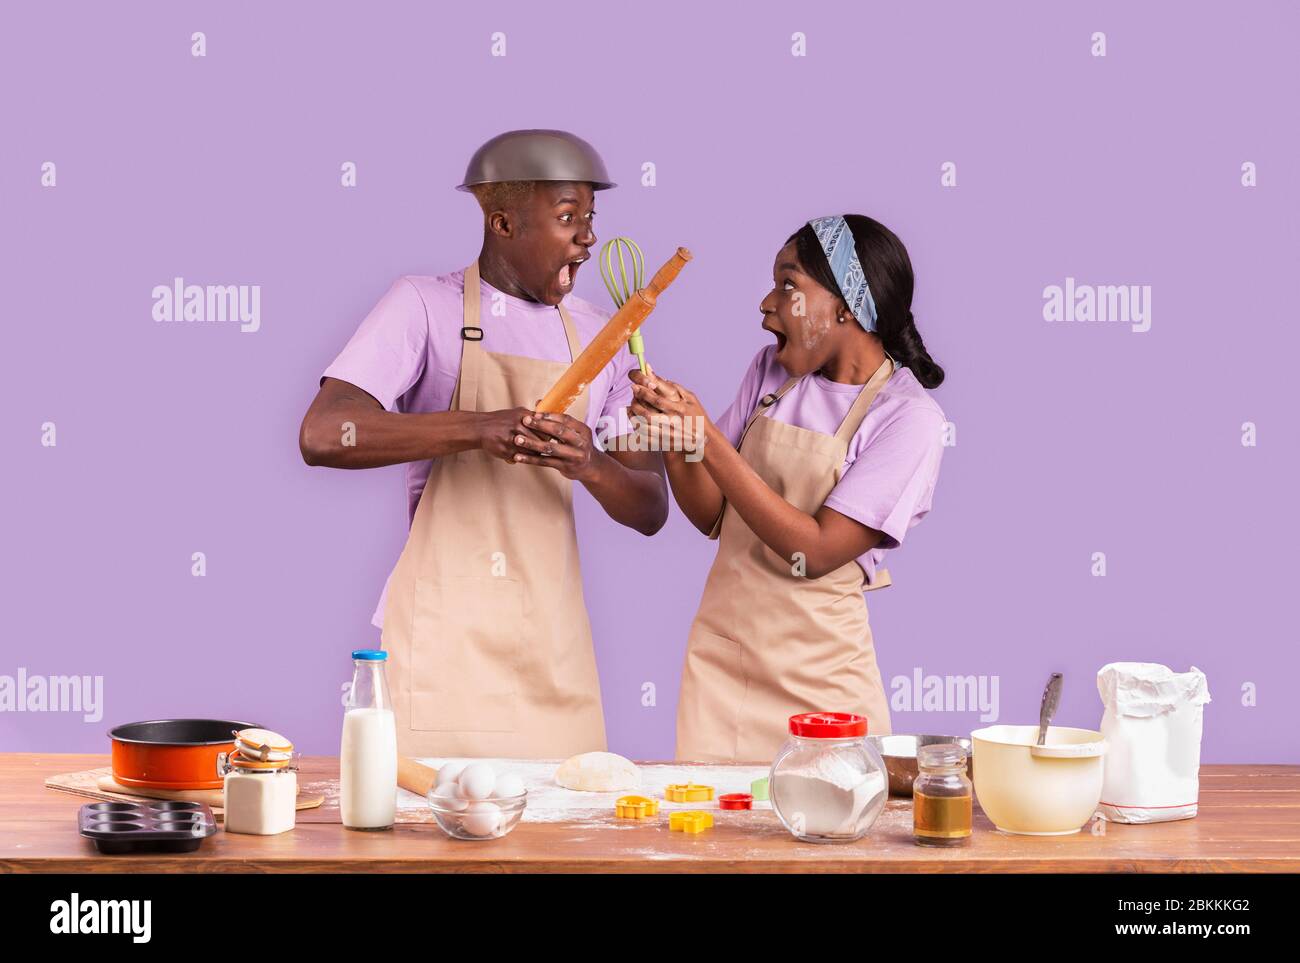 Emotional African American girl and guy fighting with kitchen utensils while cooking on color background Stock Photo